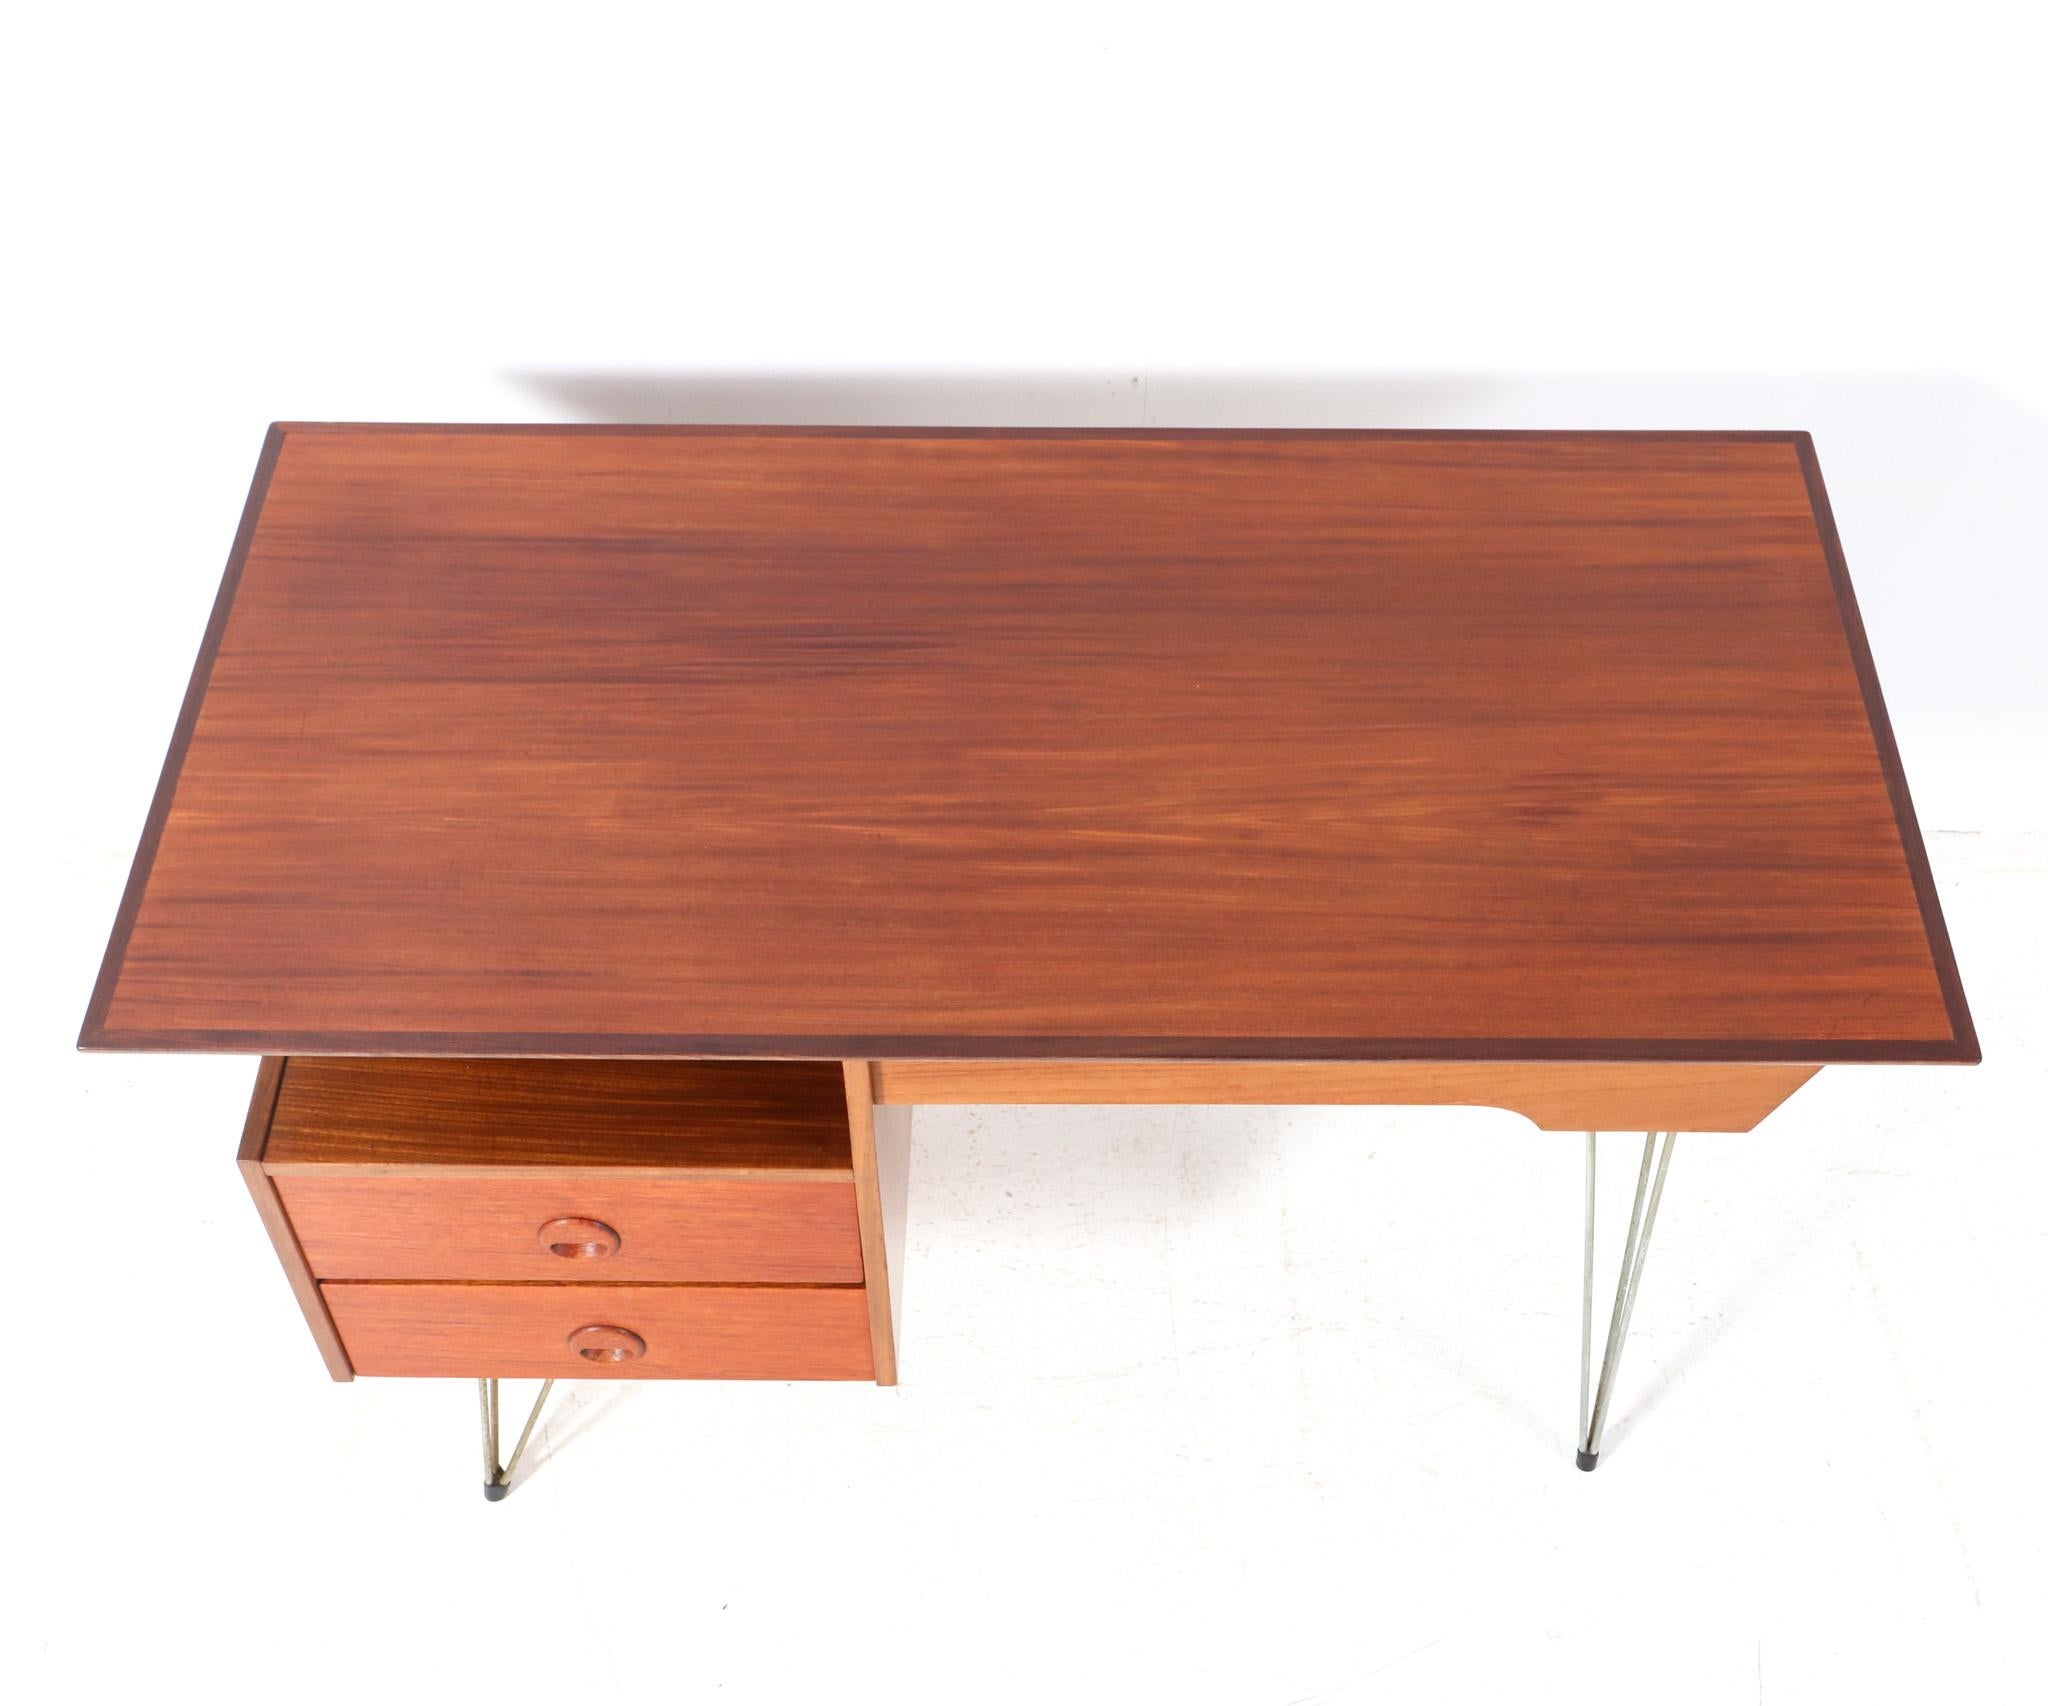  Mid-Century Modern Teak  Desk or Writing Table by Louis van Teeffelen for WéBé In Good Condition For Sale In Amsterdam, NL